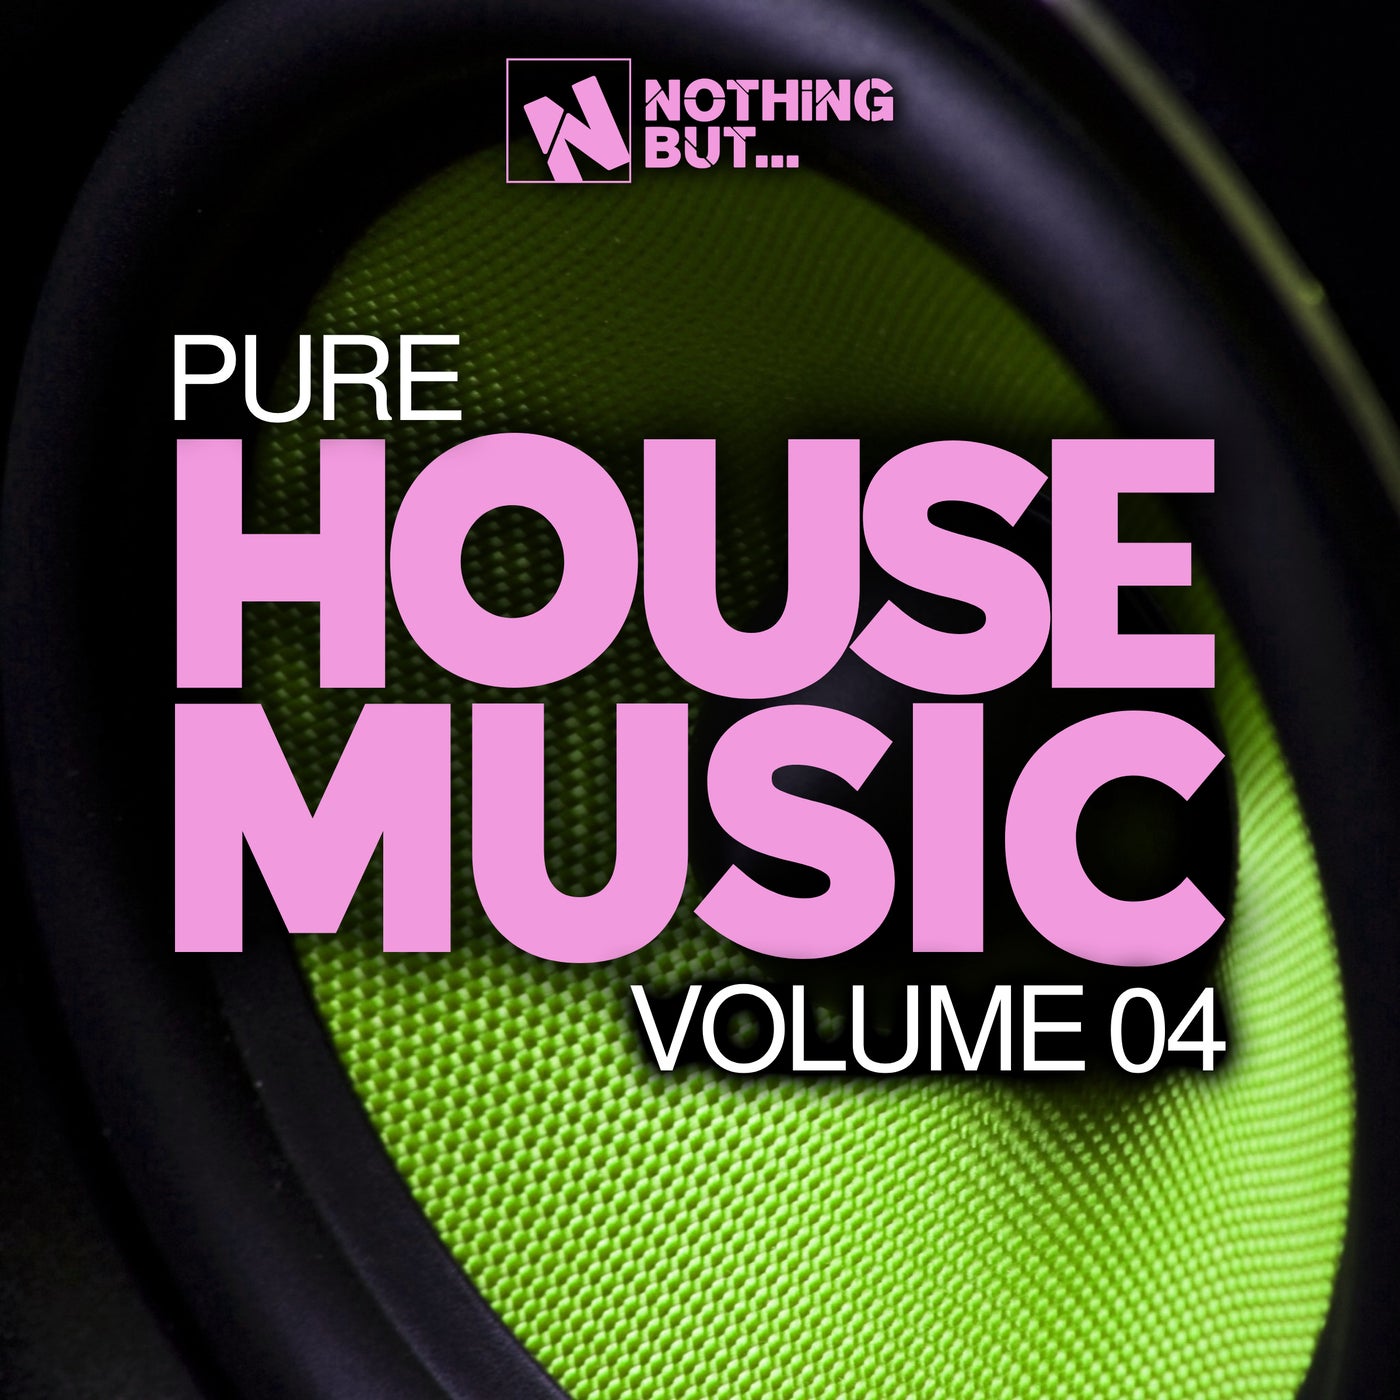 VA – Nothing But… Pure House Music, Vol. 04 [NBPHM04]